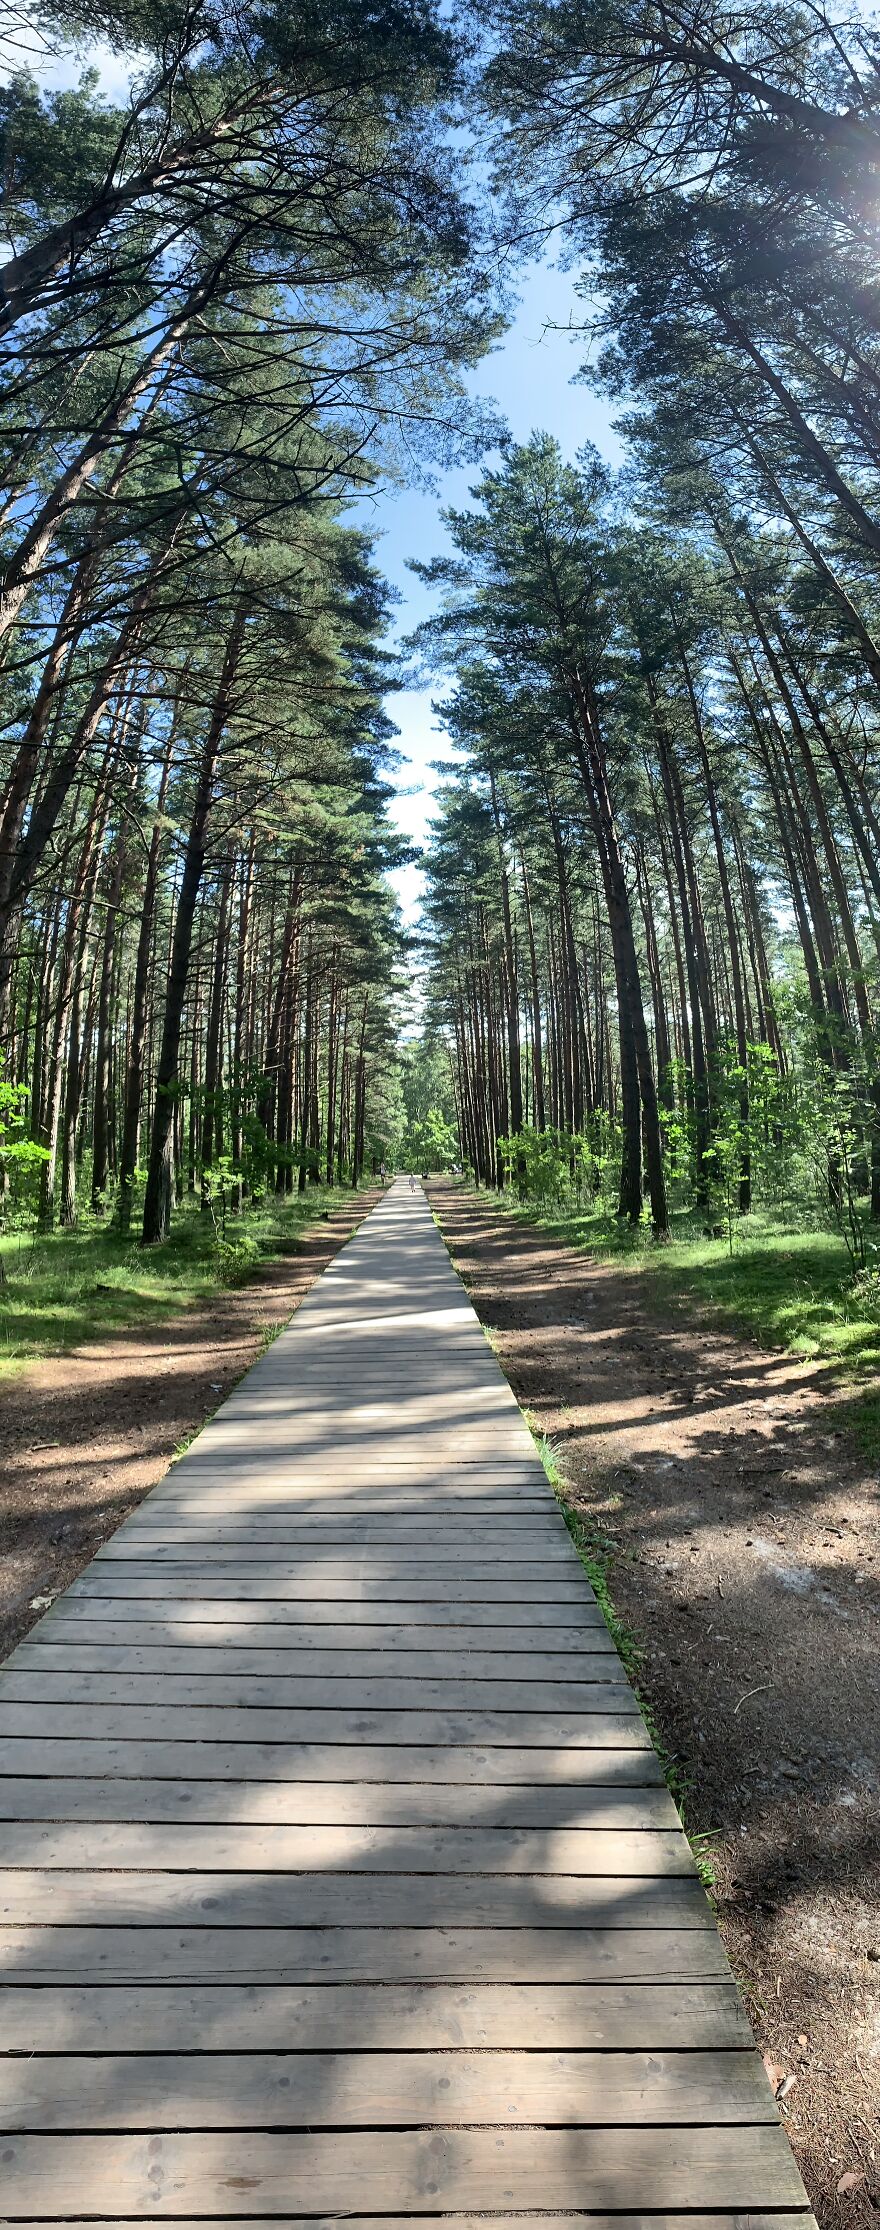 Summer, Early Morning. Forest With One Straight Path To The Sea